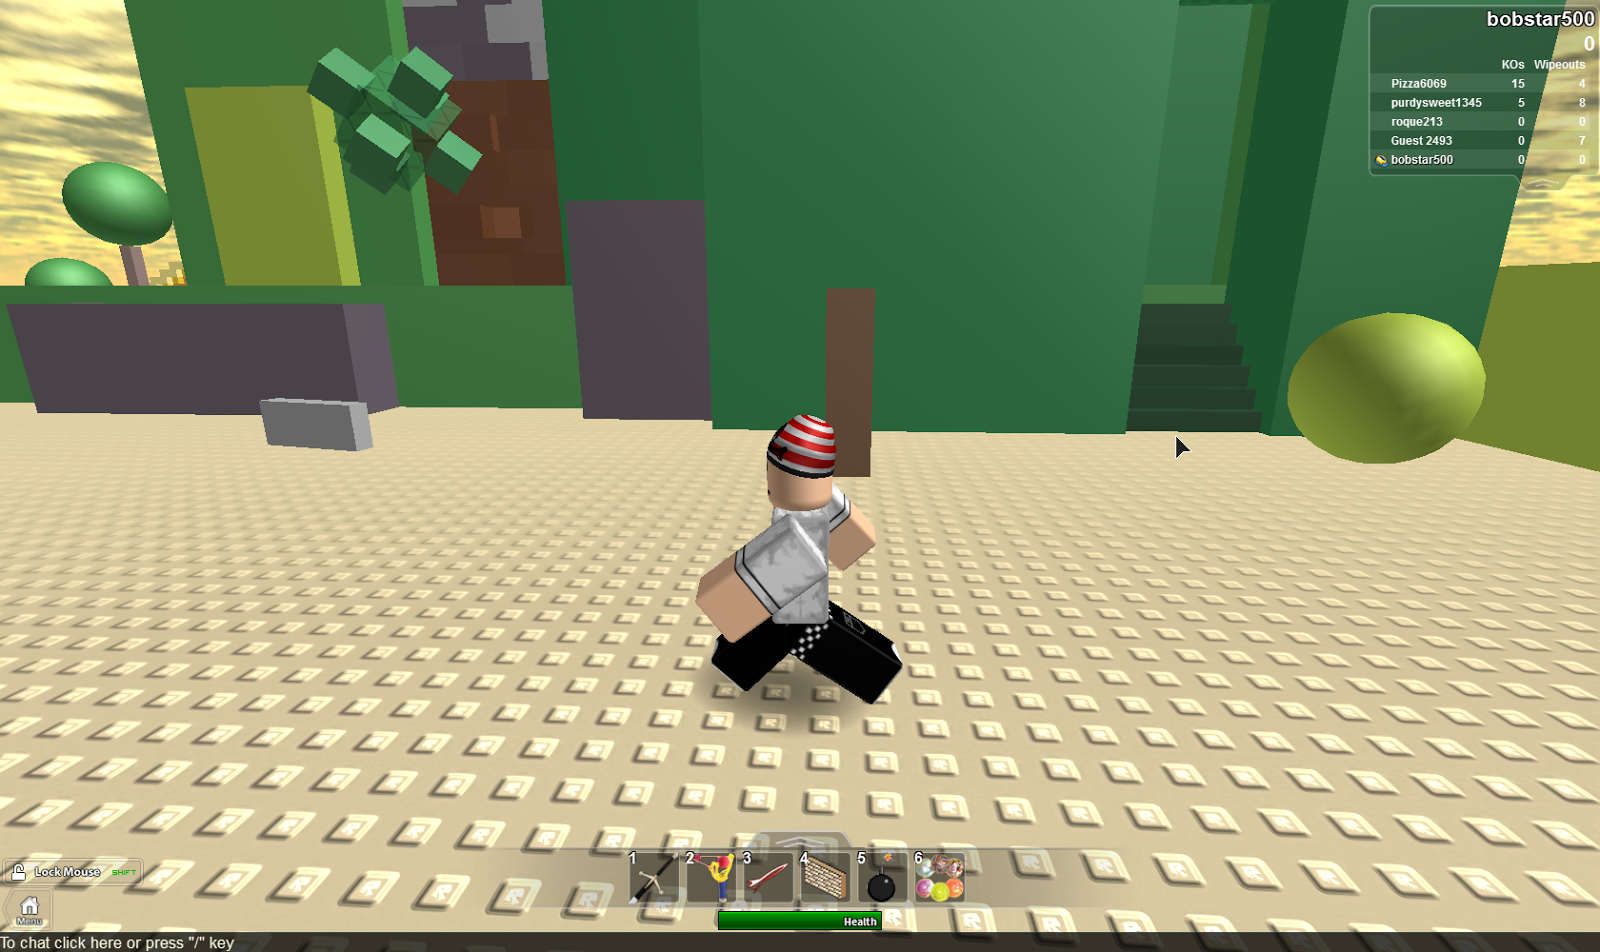 Unofficial Roblox June 2014 - roblox character running